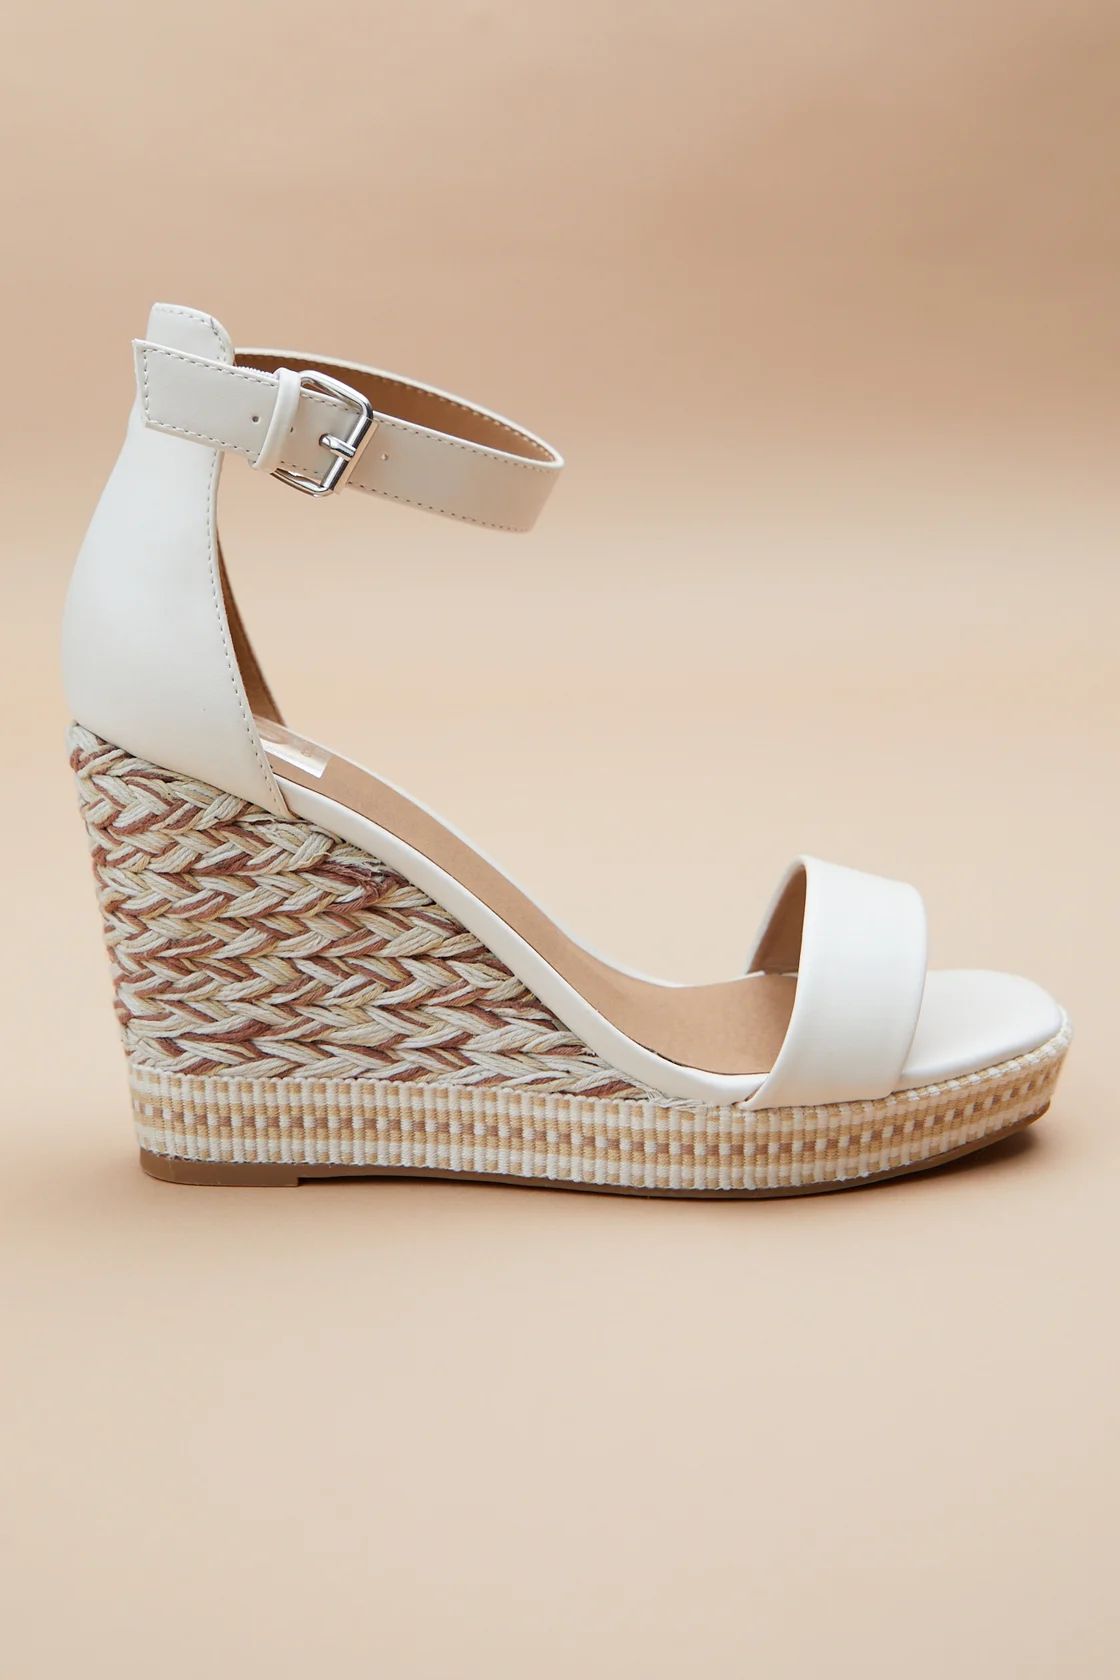 Hagar Woven Platform Wedges By Dolce Vita in Ivory | Altar'd State | Altar'd State